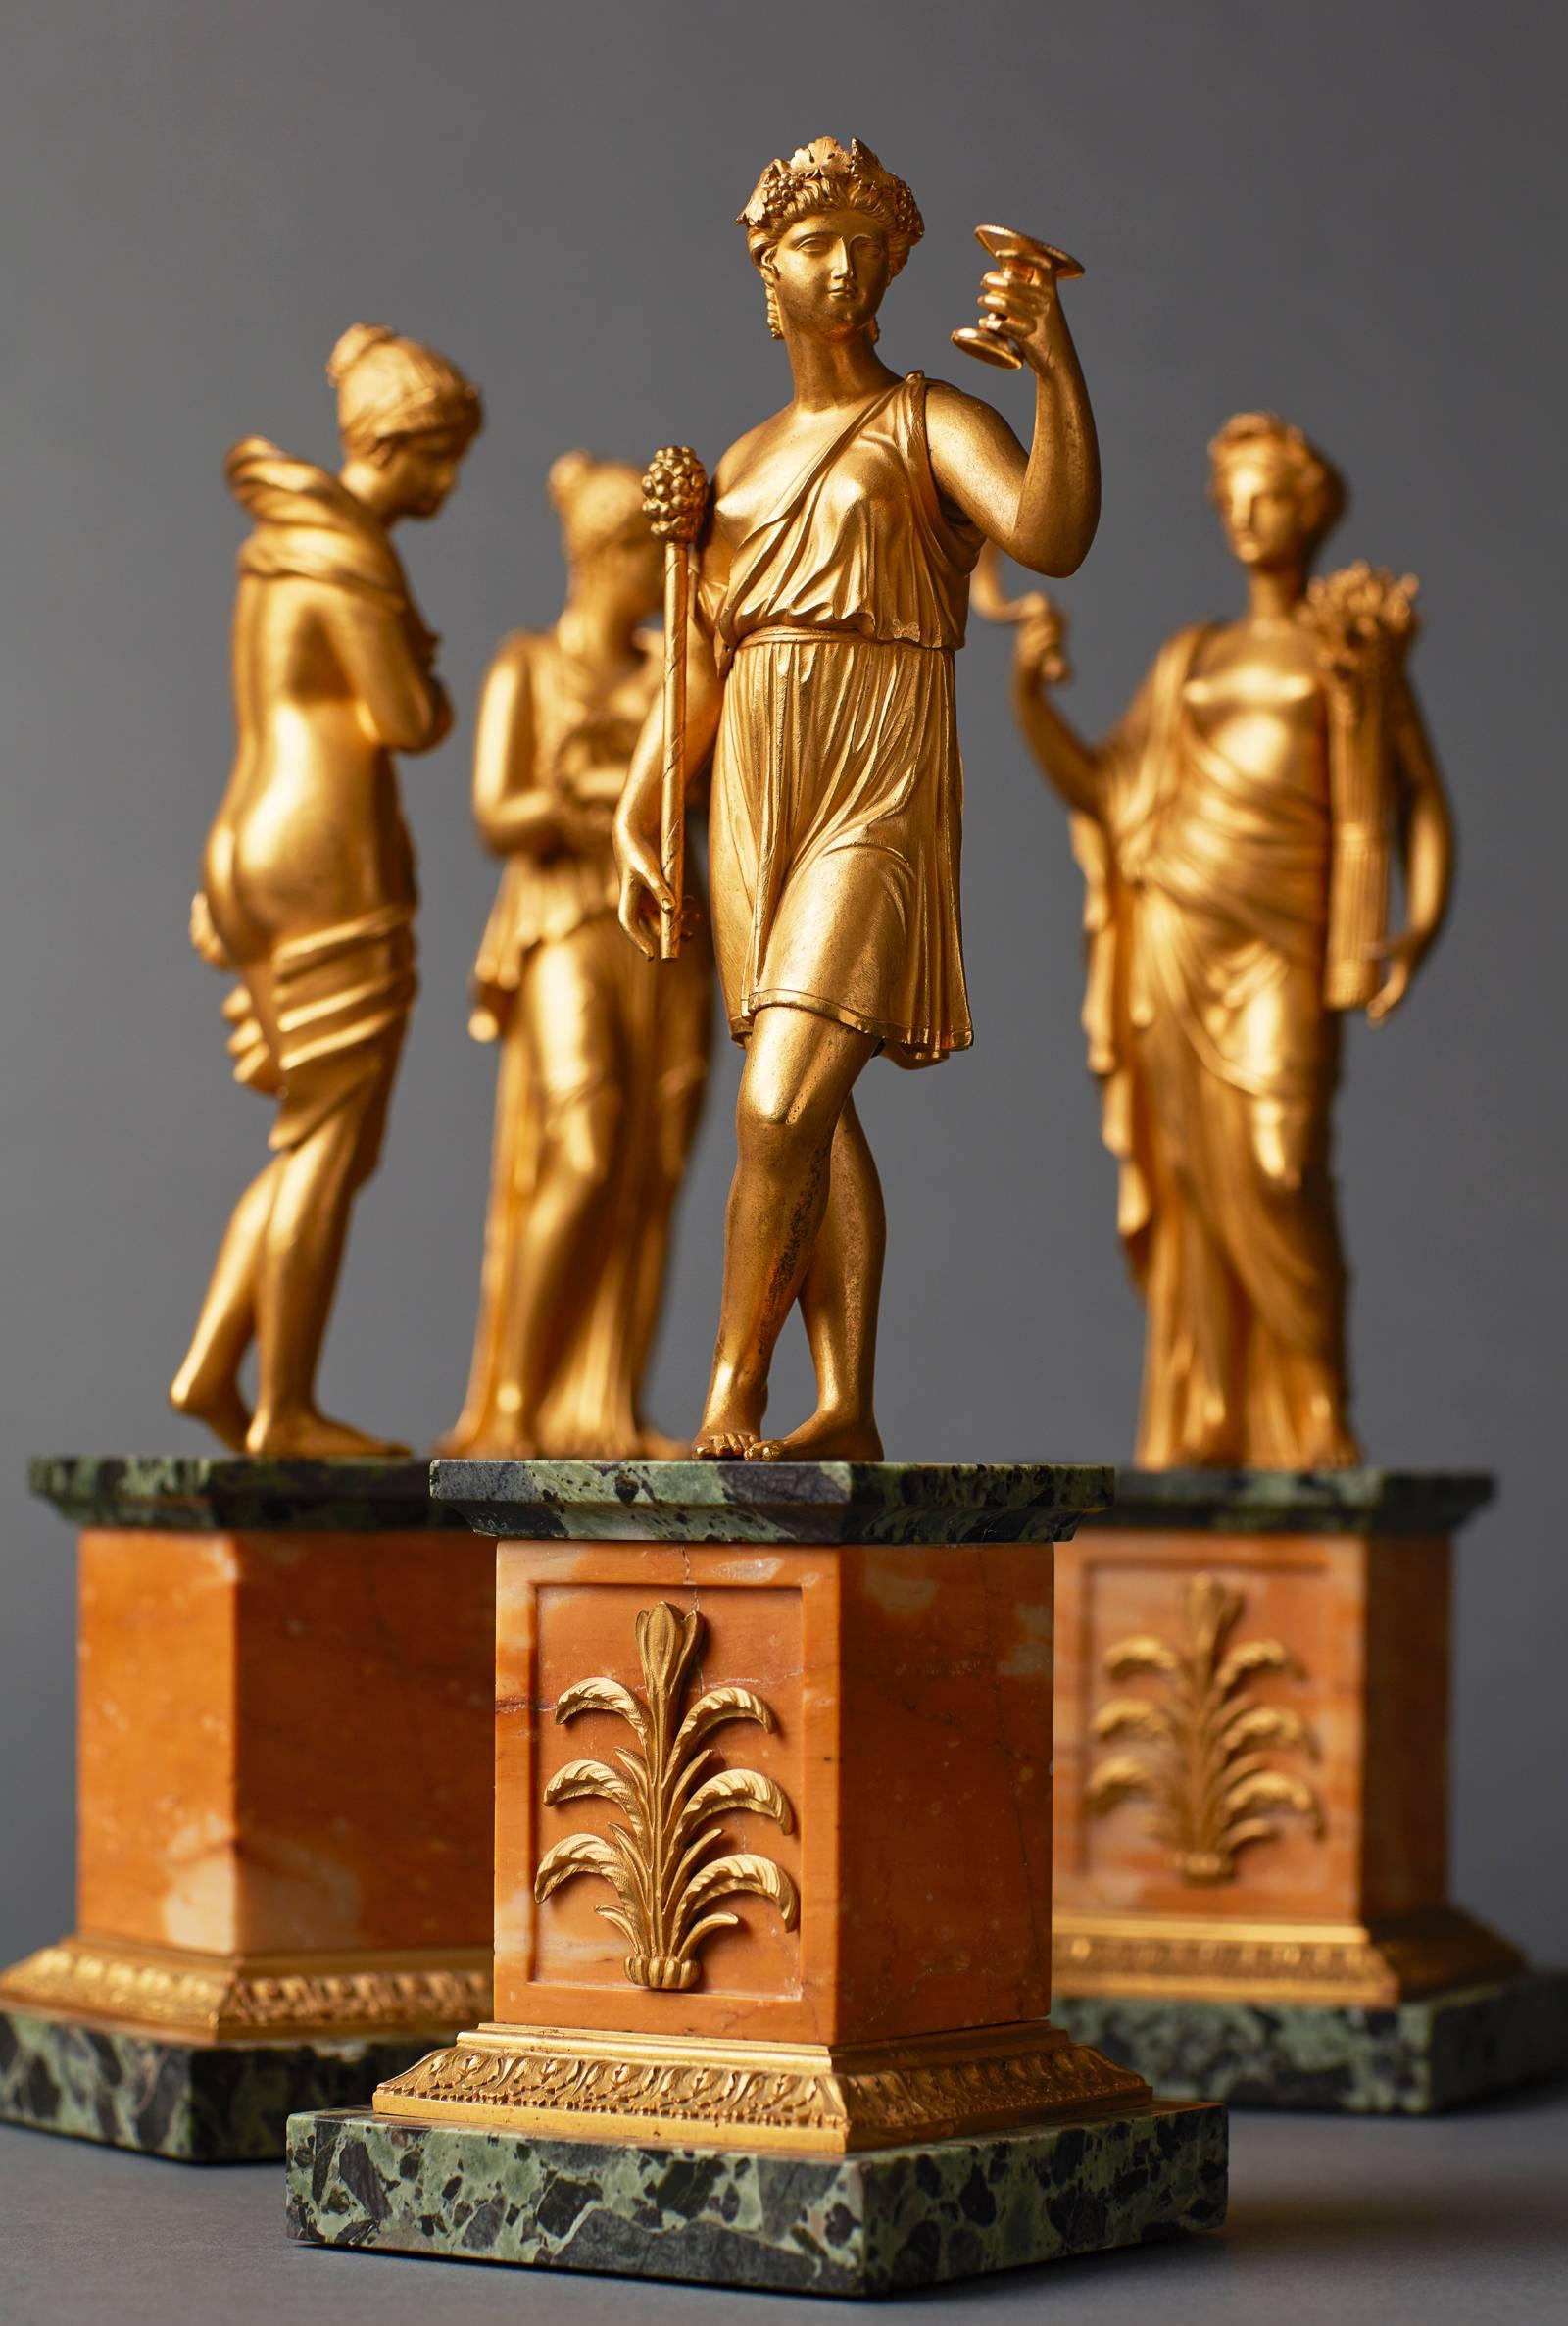 Gilt Important Russian Set of Early 19th Century Empire Bronze Goddesses four Seasons